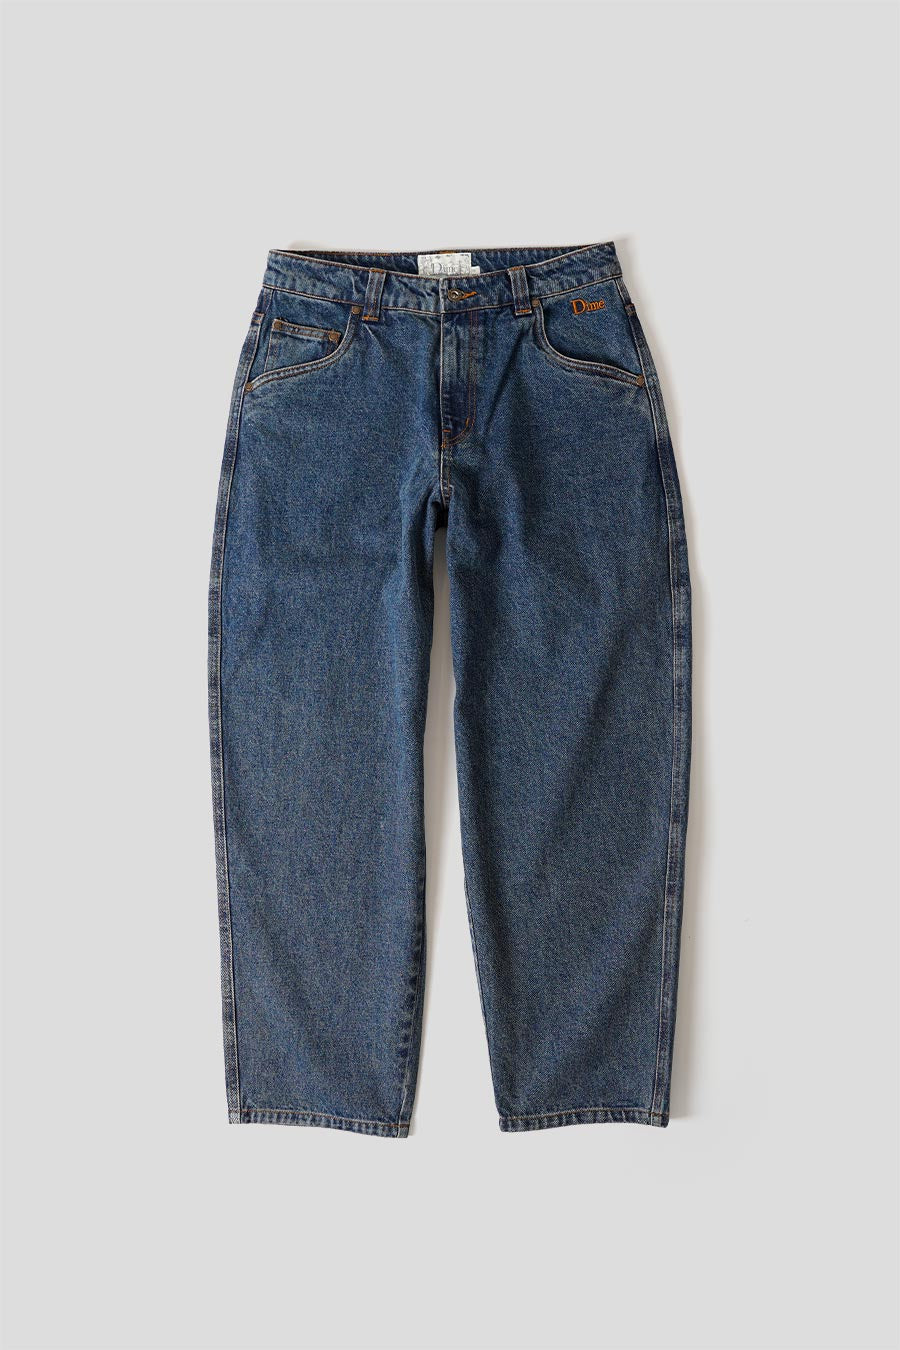 Dime - STONE WASHED CLASSIC BAGGY DENIM  - LE LABO STORE